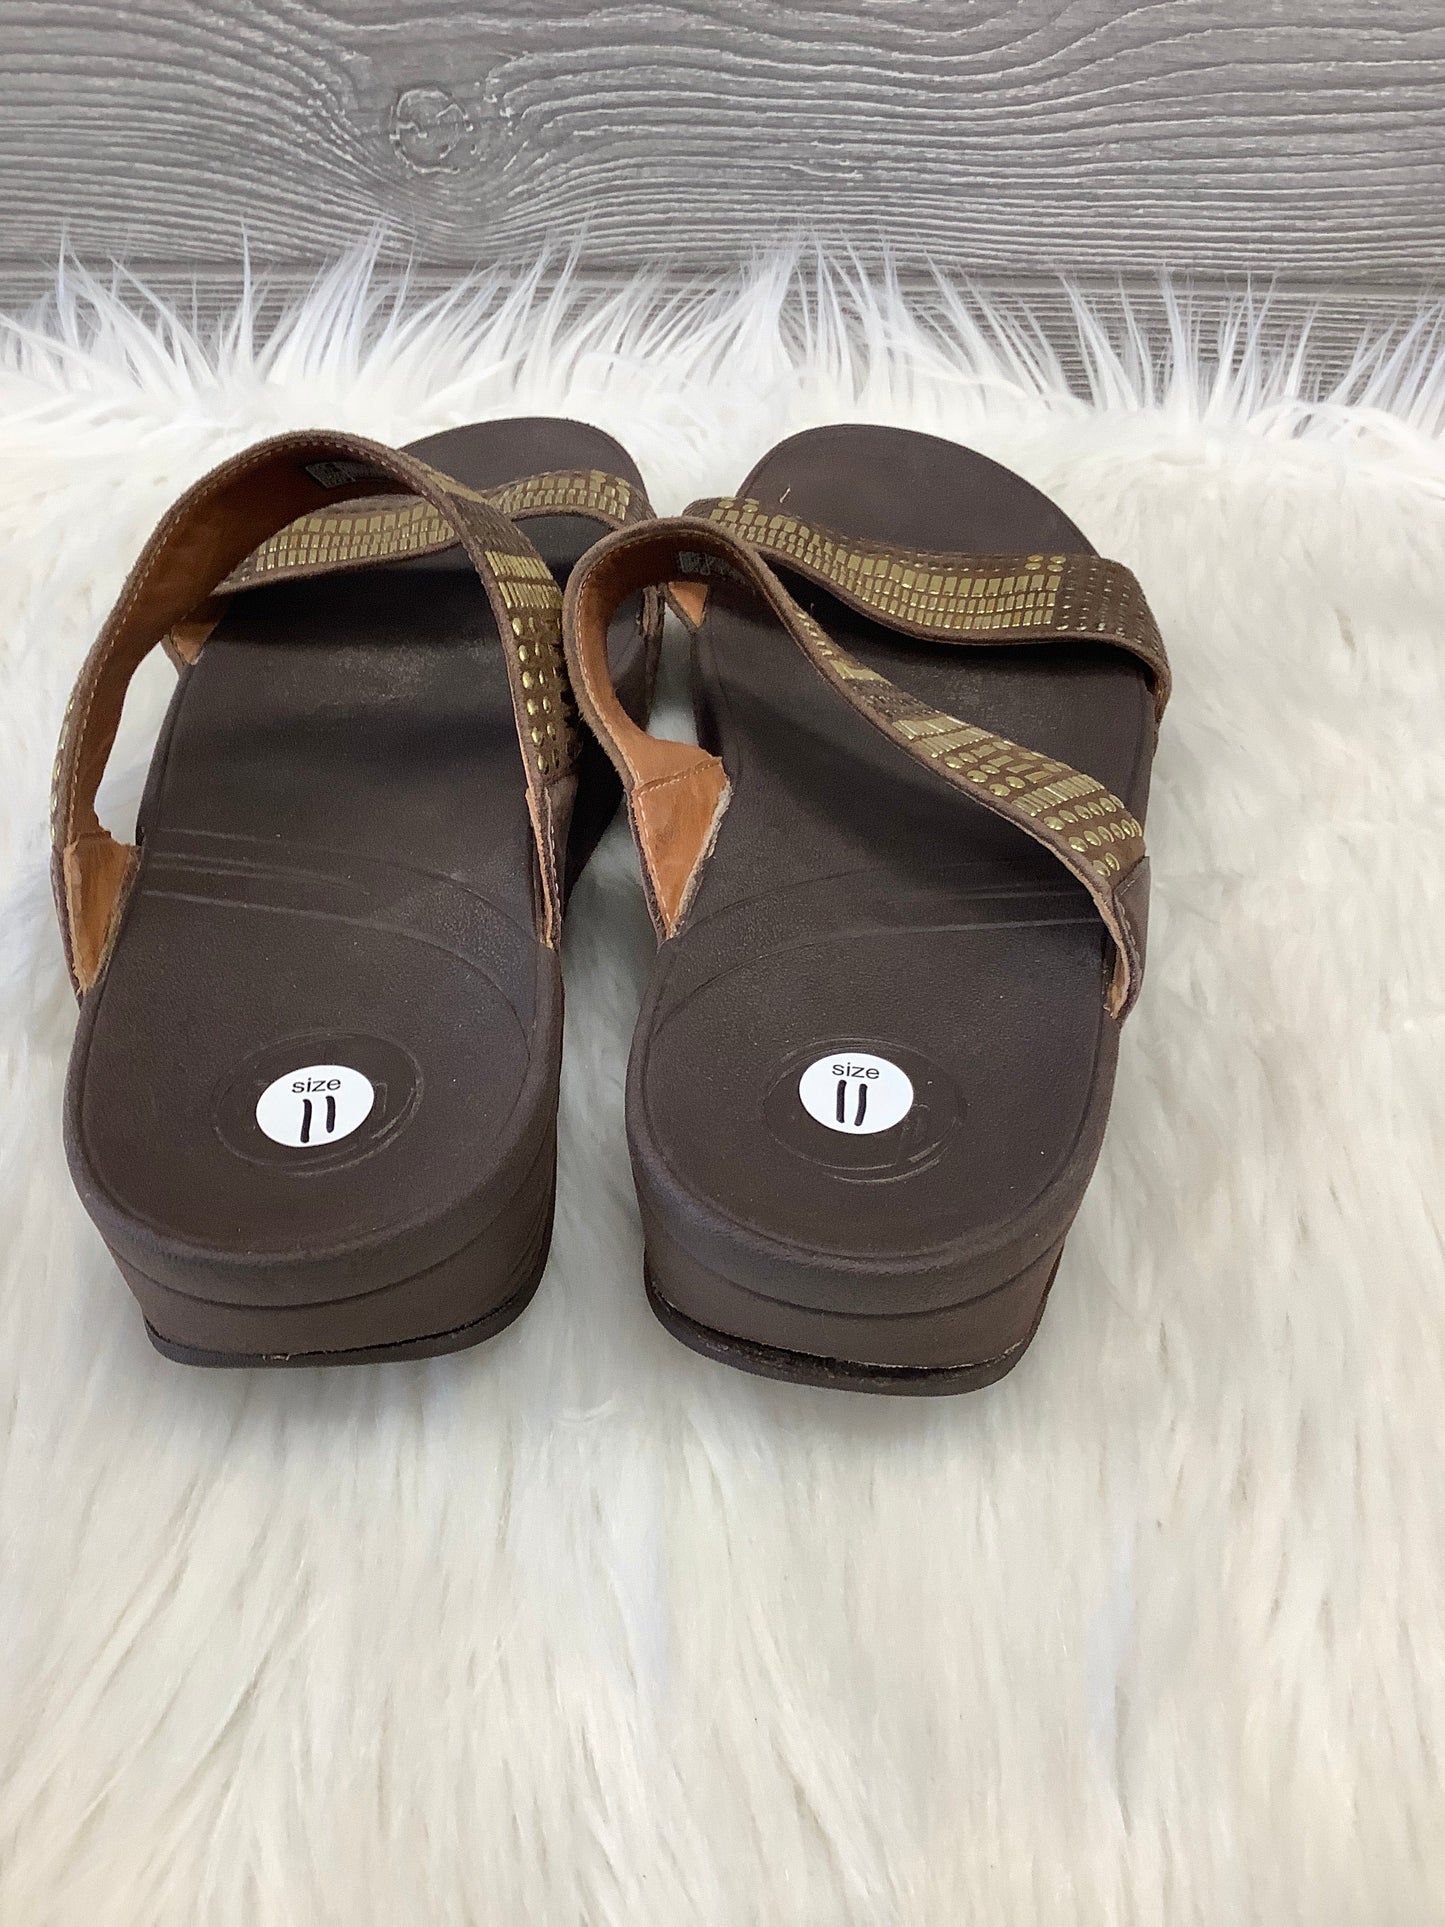 Sandals Flats By Fitflop  Size: 11